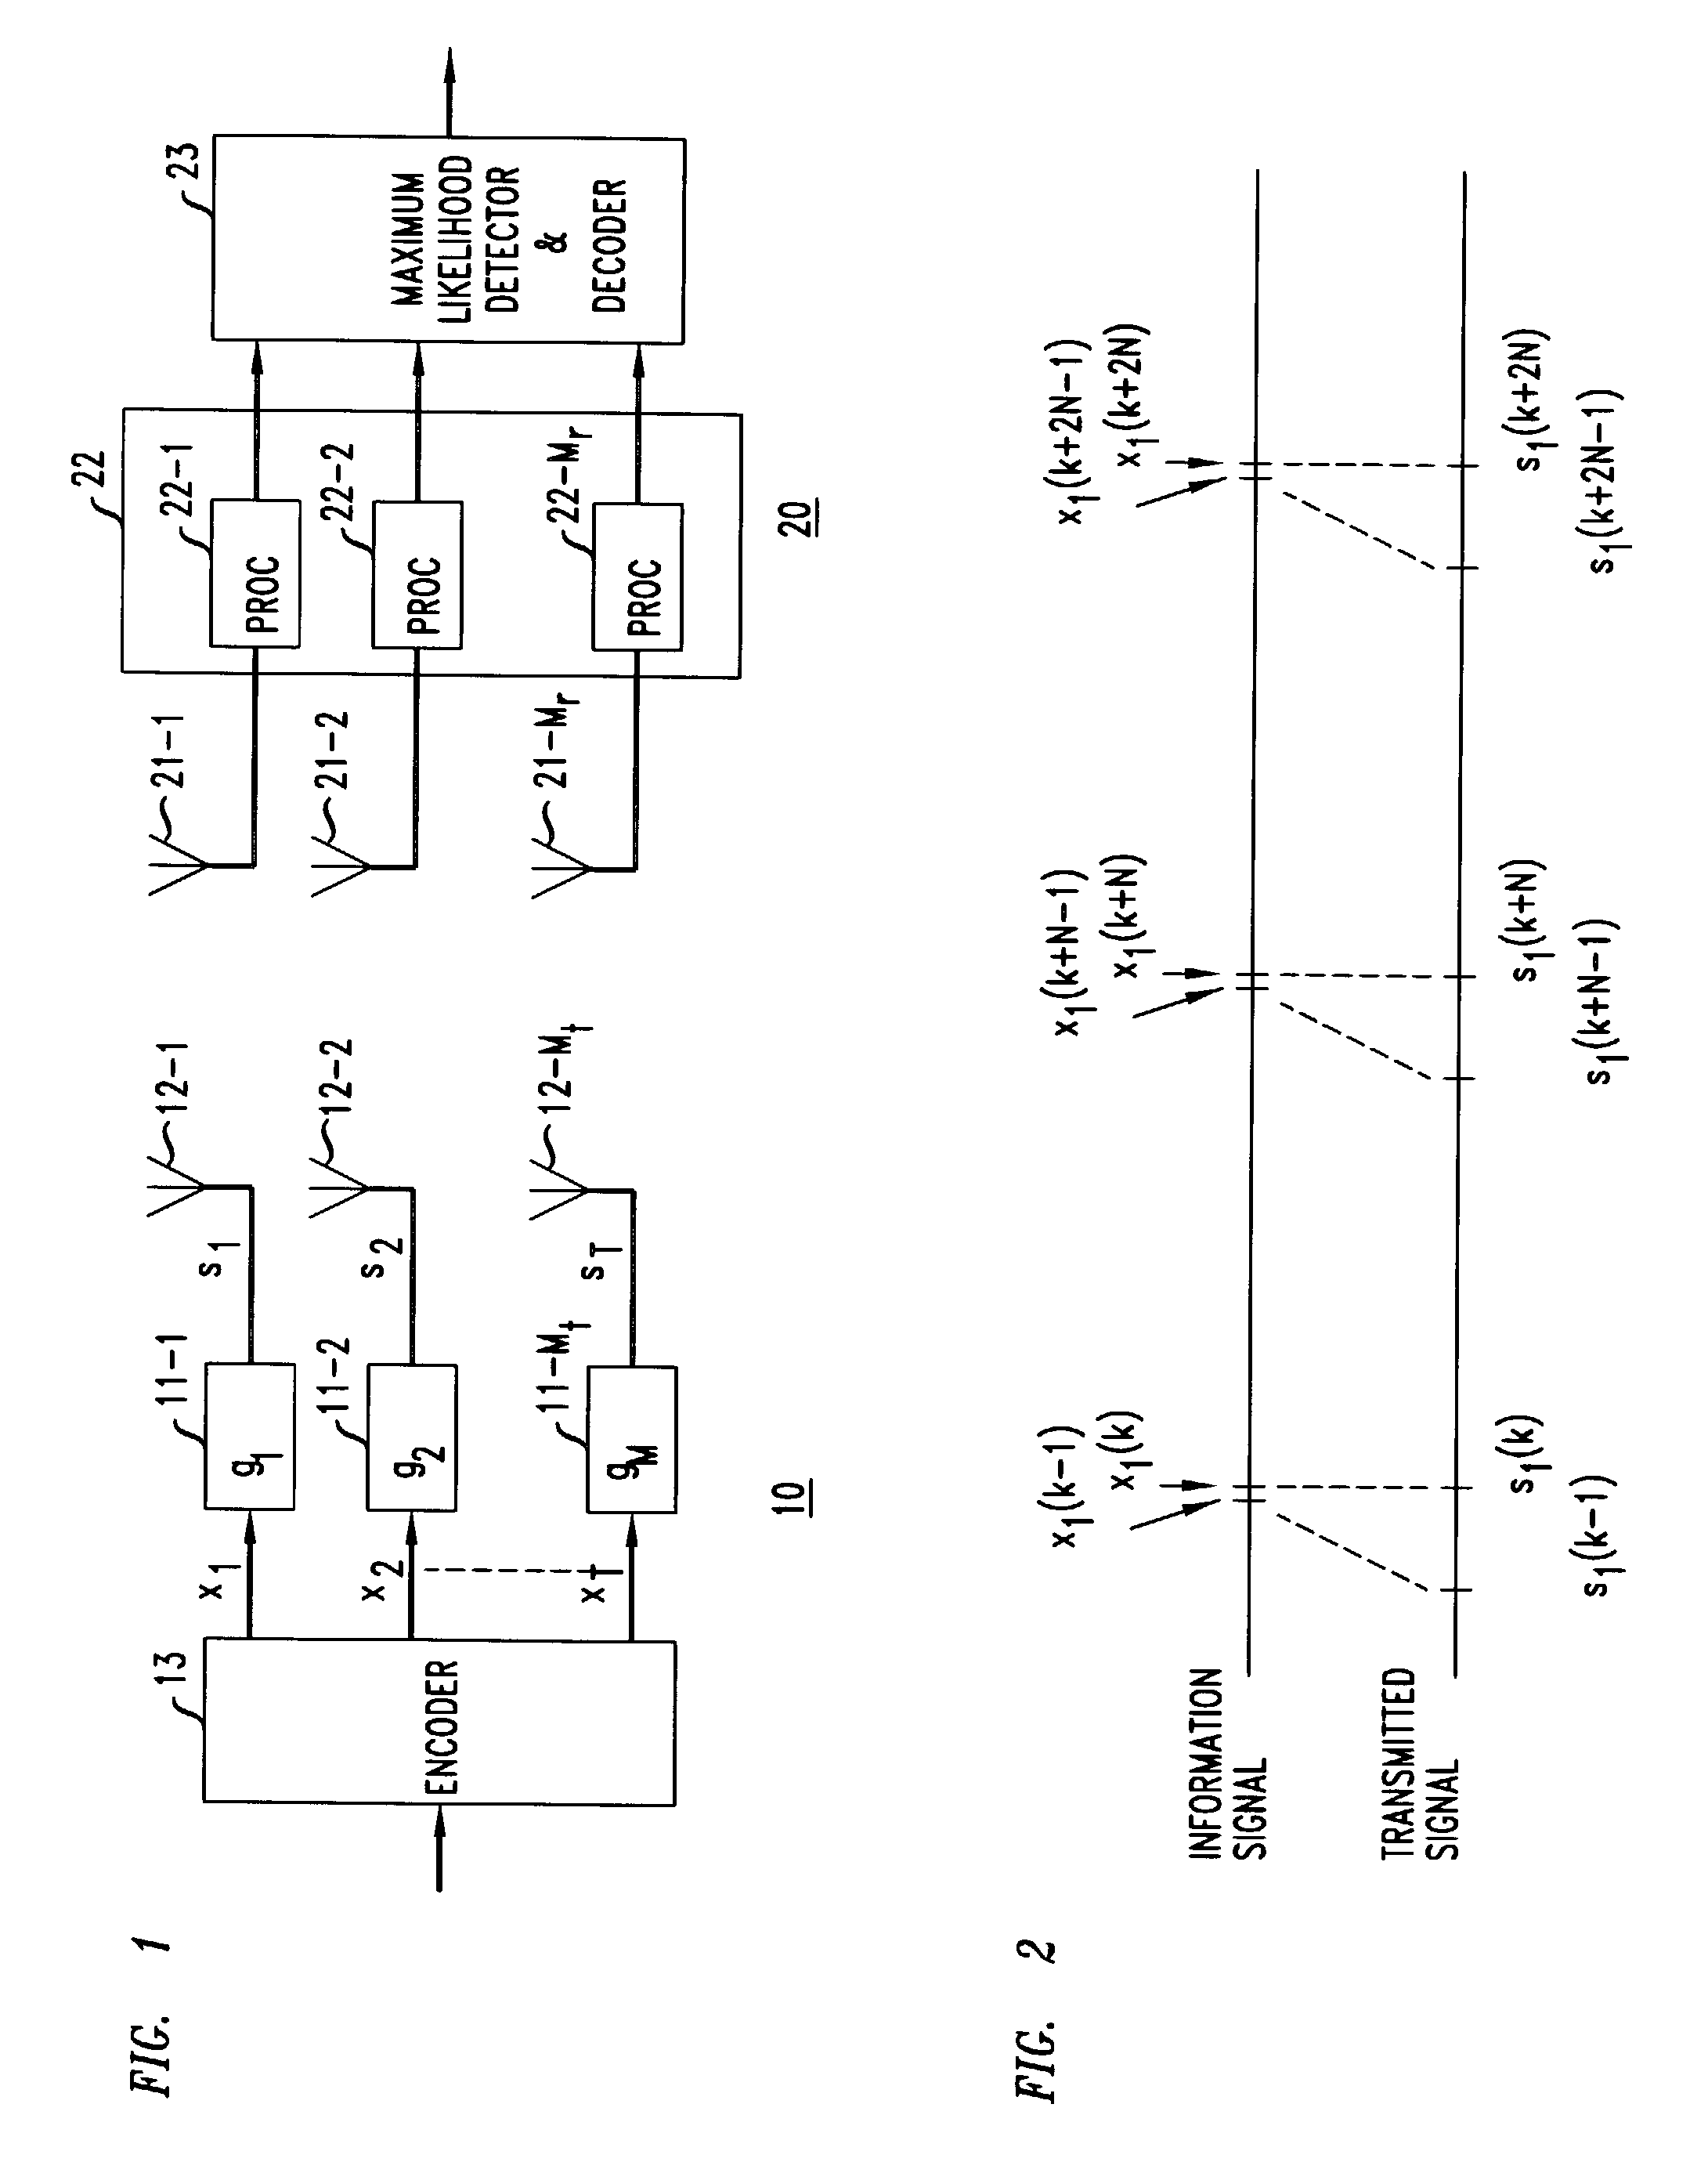 Amelioration in inter-carrier interference in OFDM